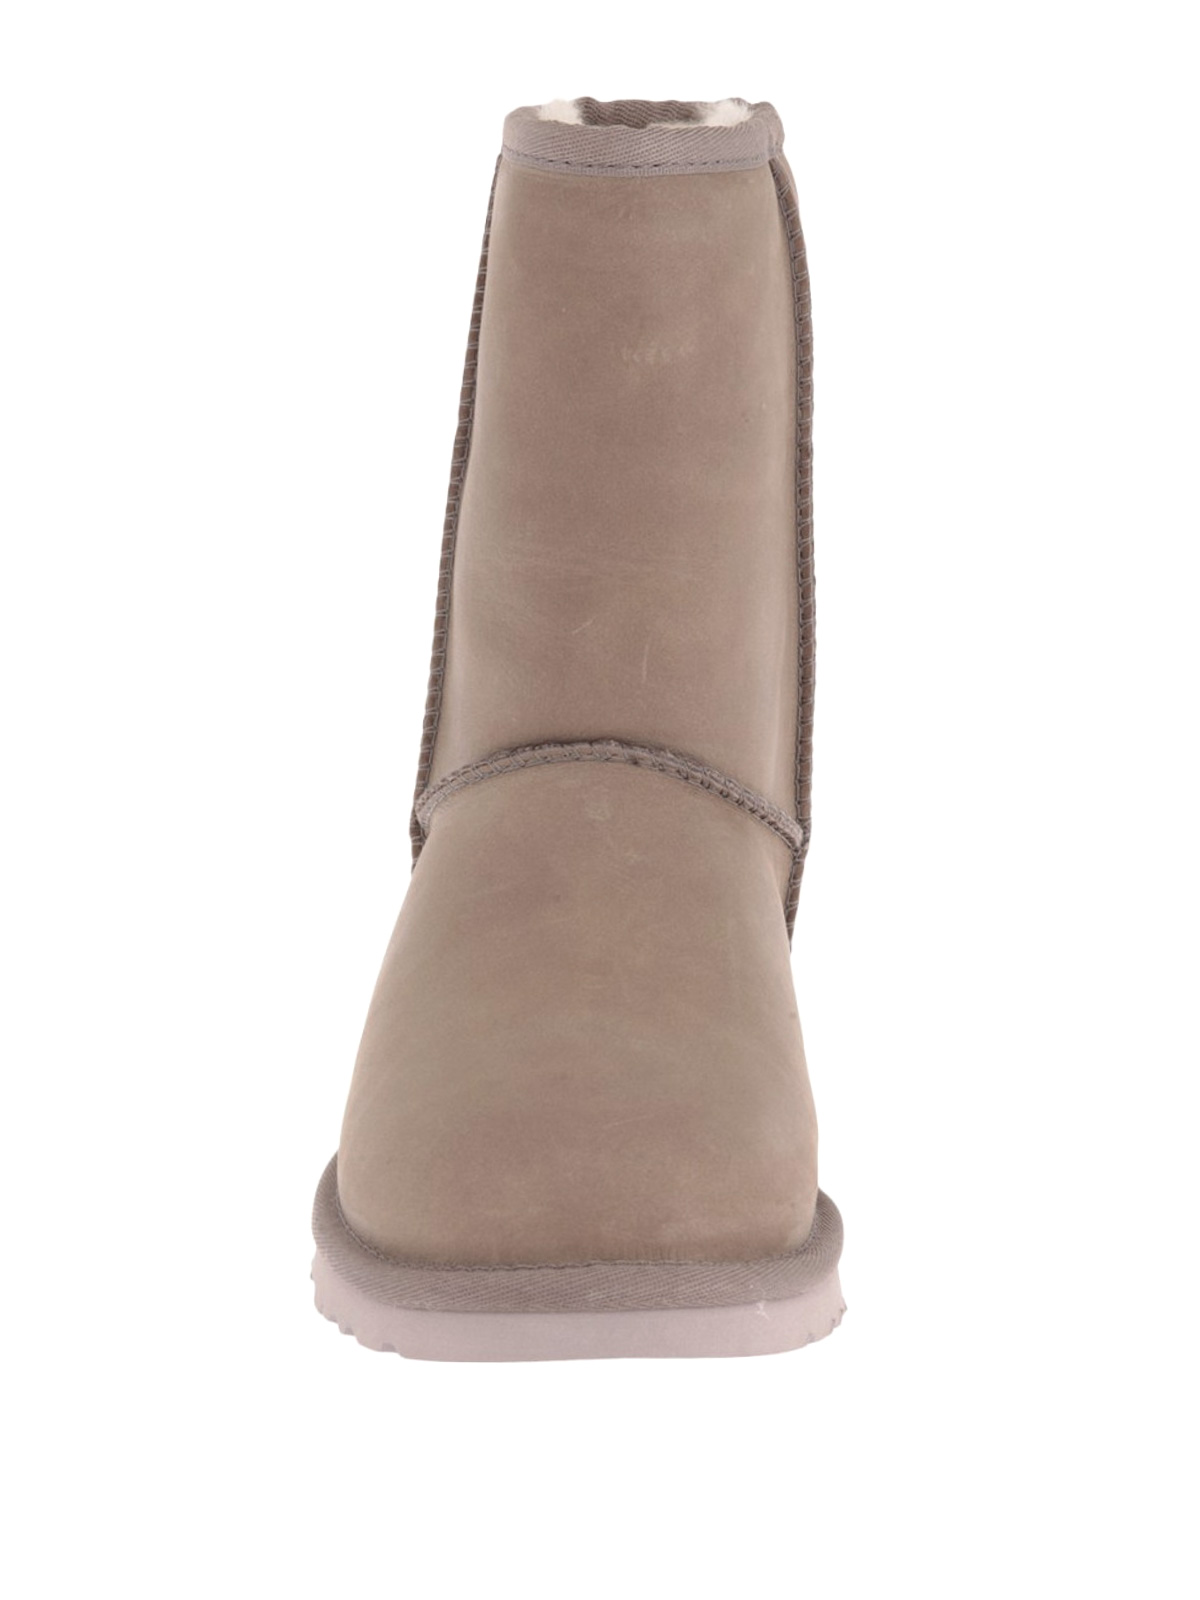 ugg classic short leather